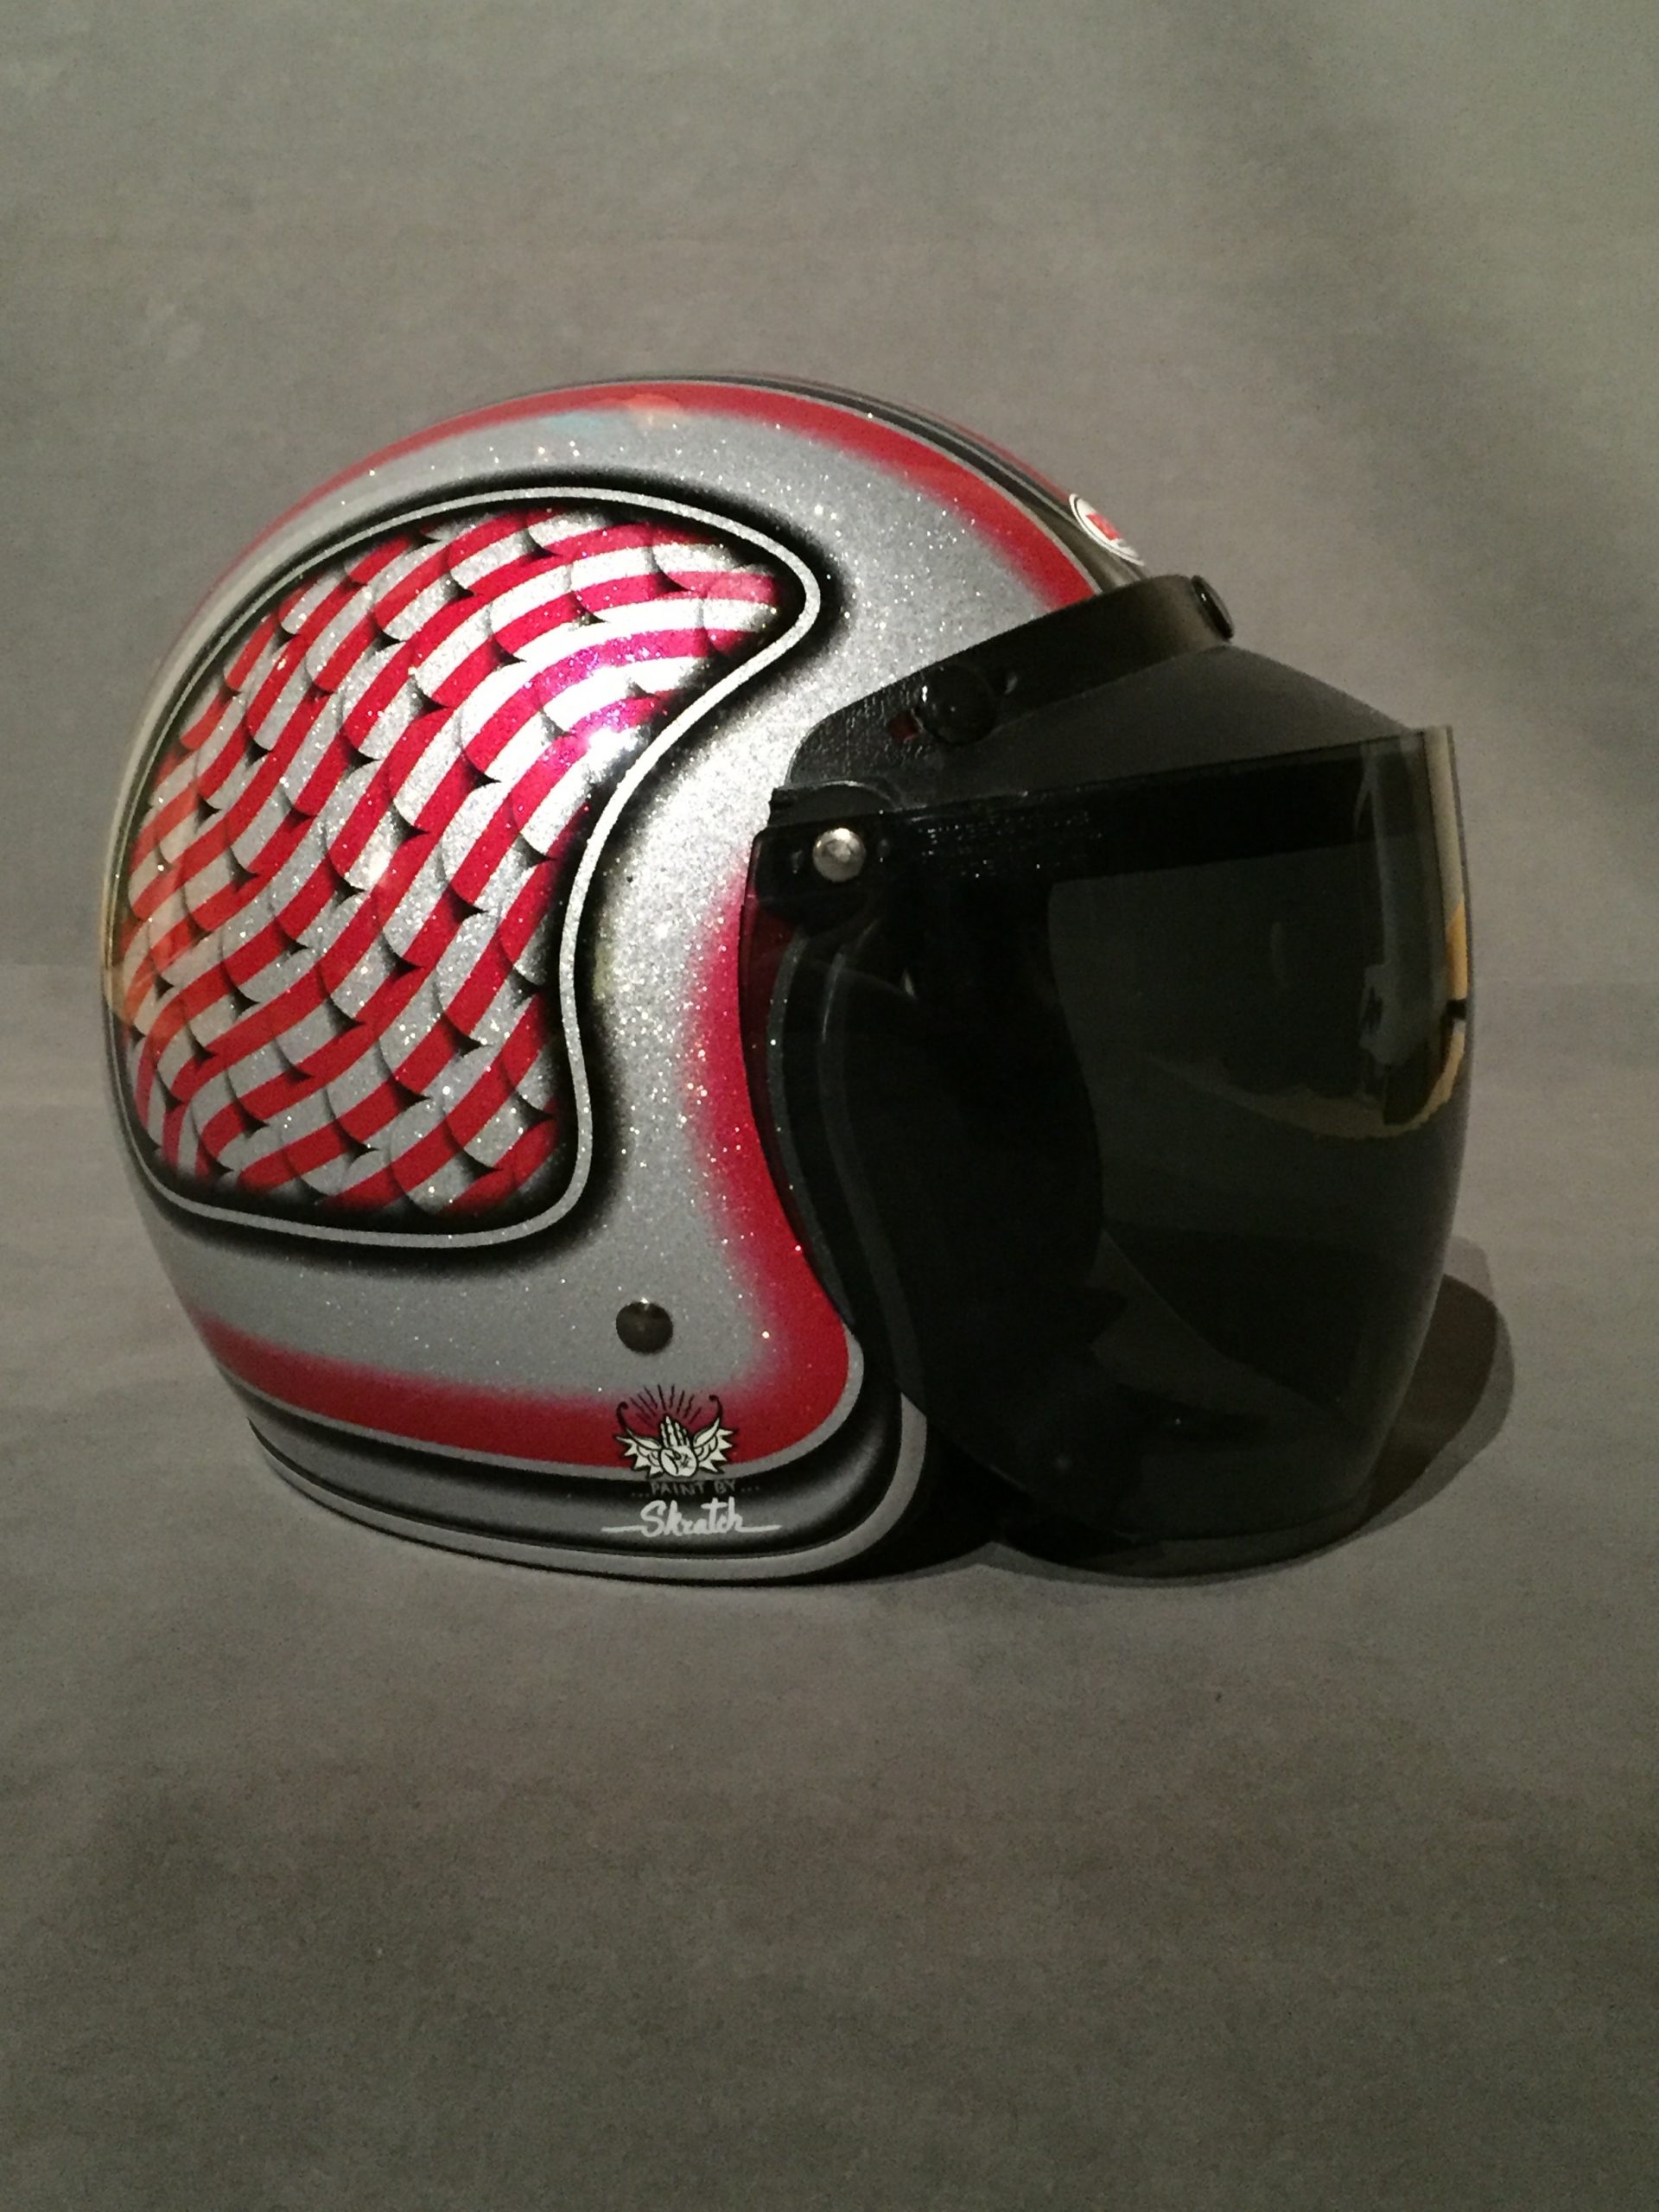 Red and silver motorcycle helmet with black visor.